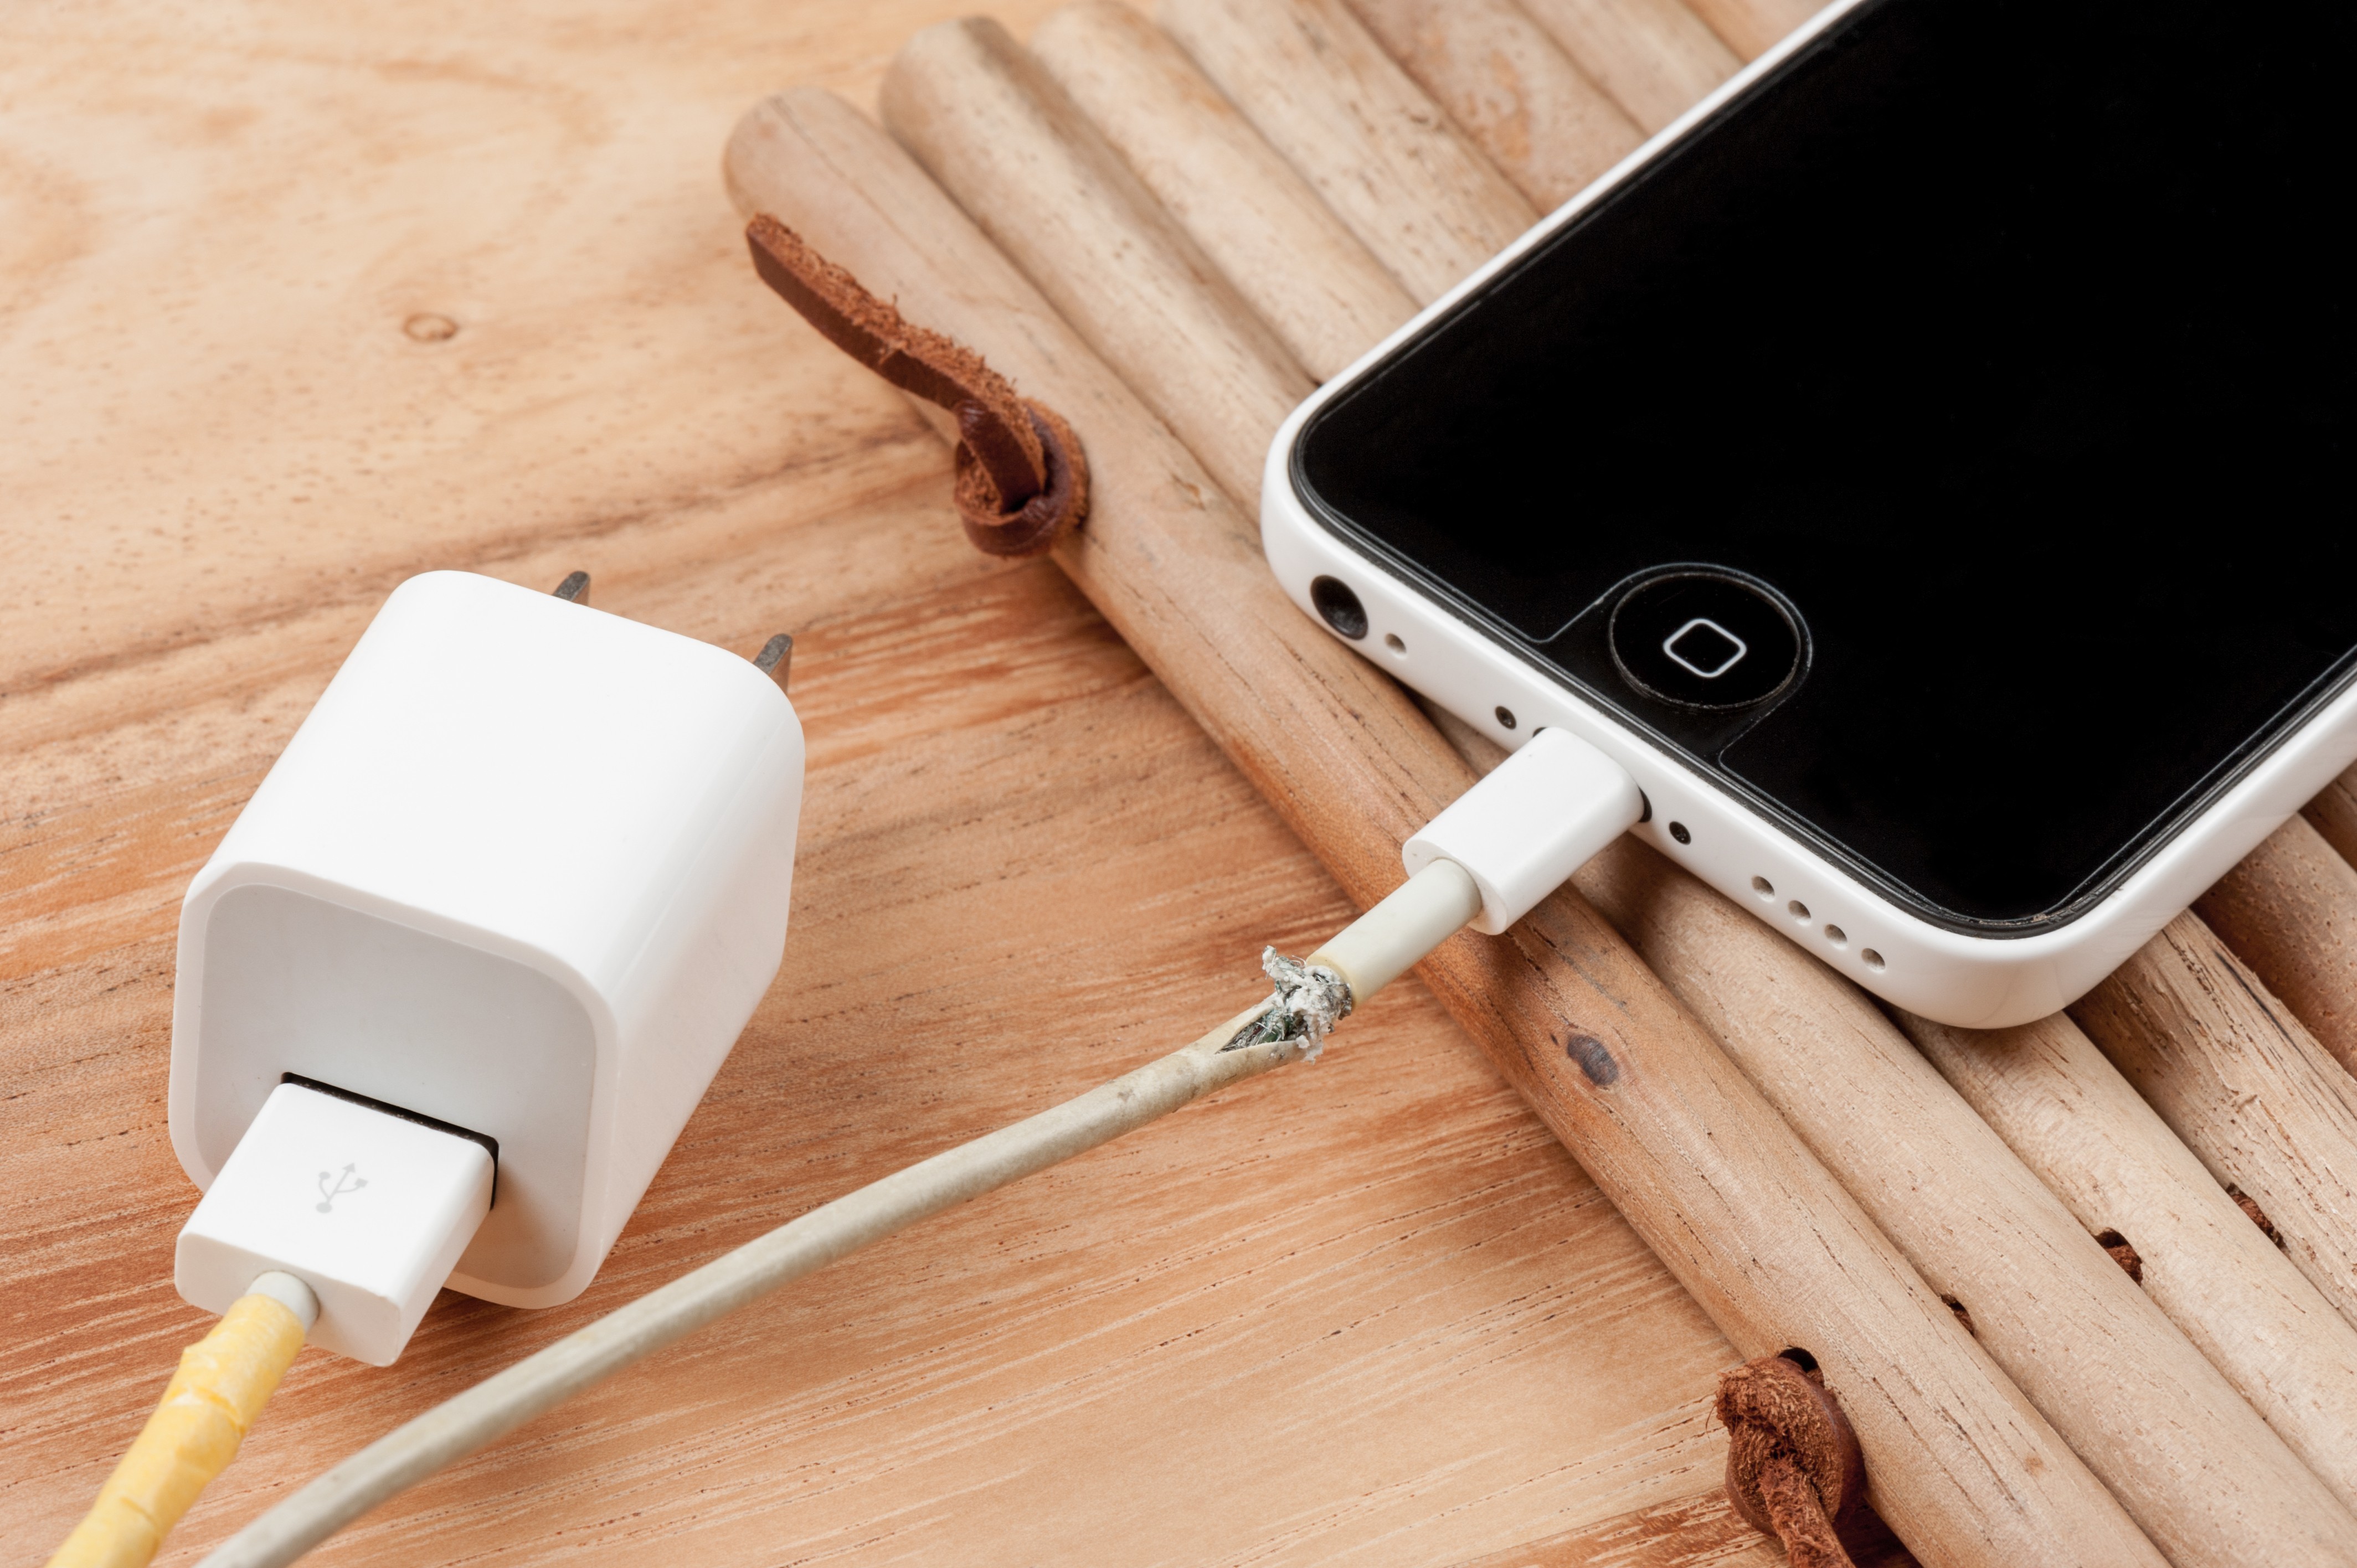 Fake Lightning cables can damage your iPhone. Here's how to make sure yours  is genuine